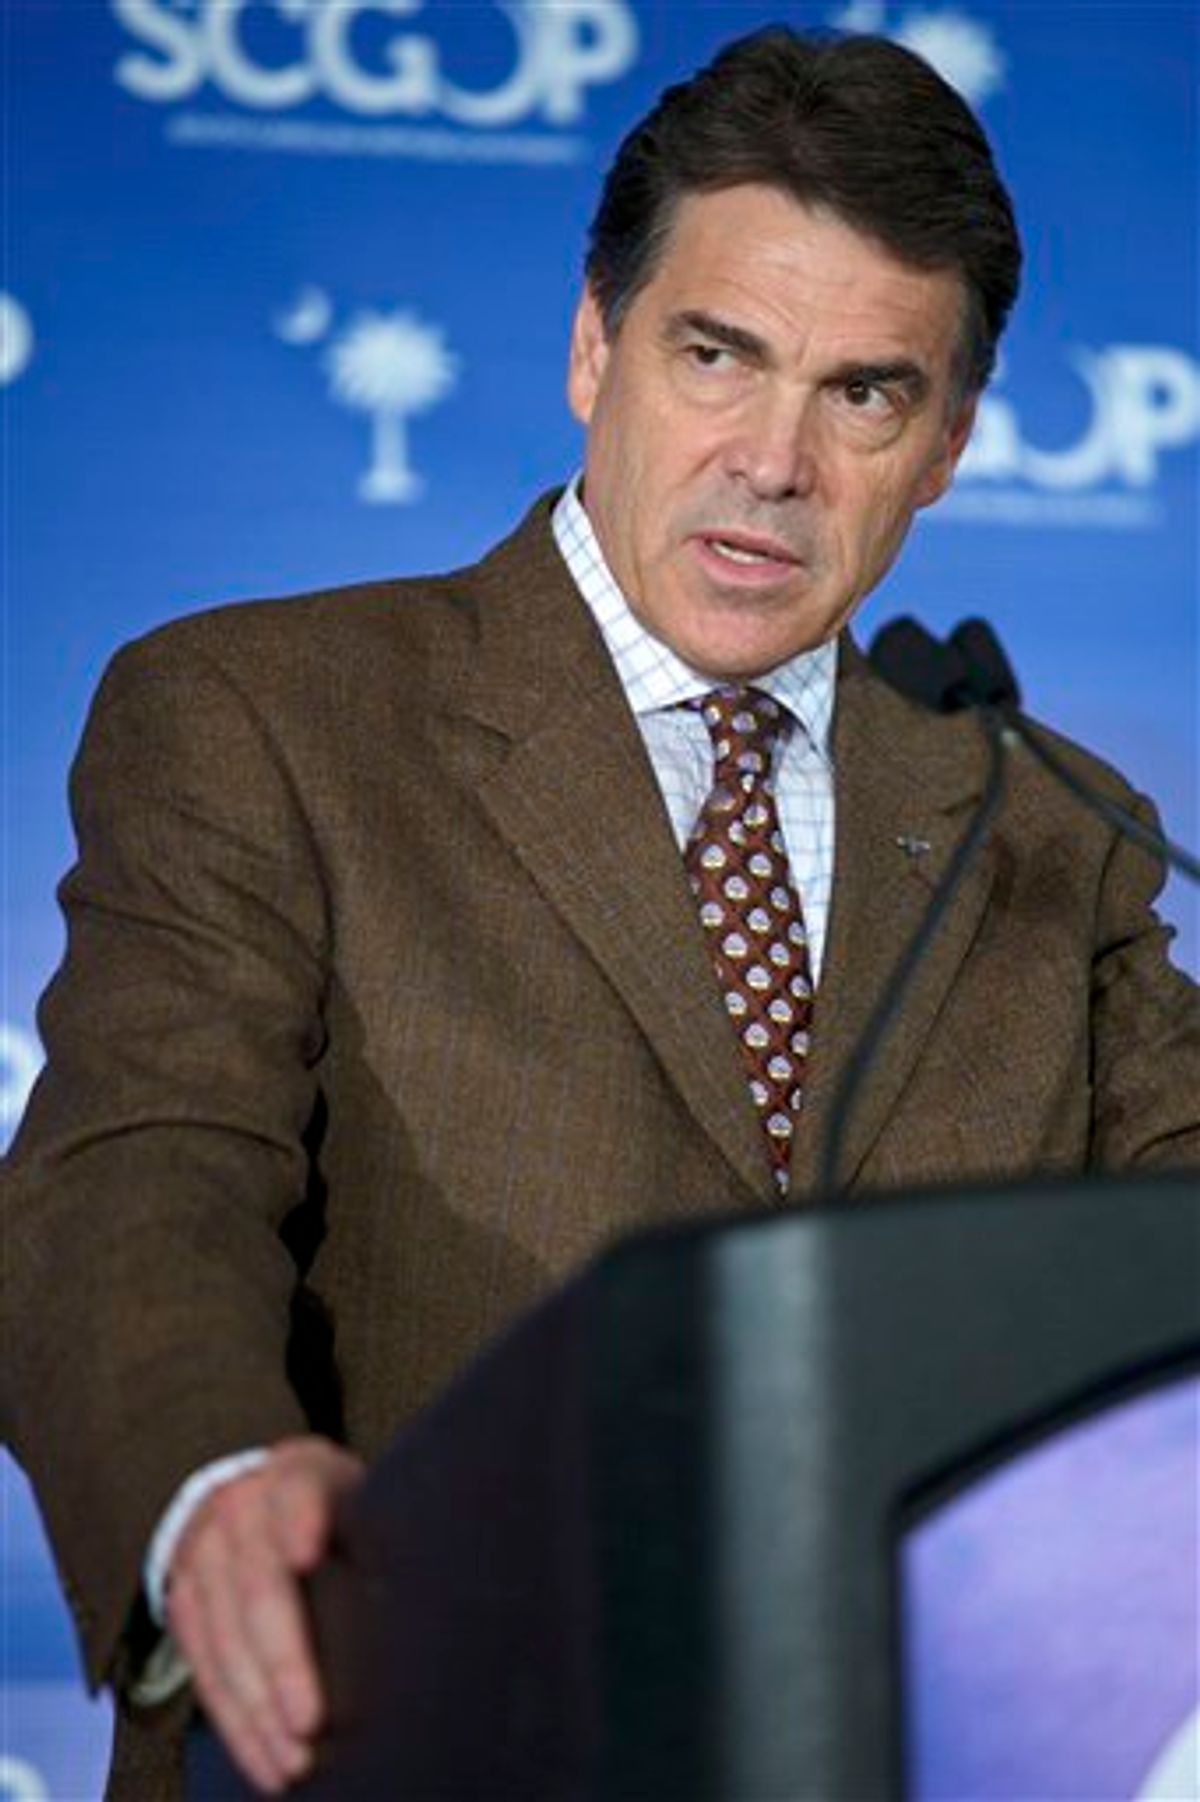 Republican presidential candidate, Texas Gov. Rick Perry, speaks to members of the South Carolina GOP during a lunch in Columbia, S.C., Friday, August 19, 2011.  (AP Photo/Brett Flashnick)  (AP)